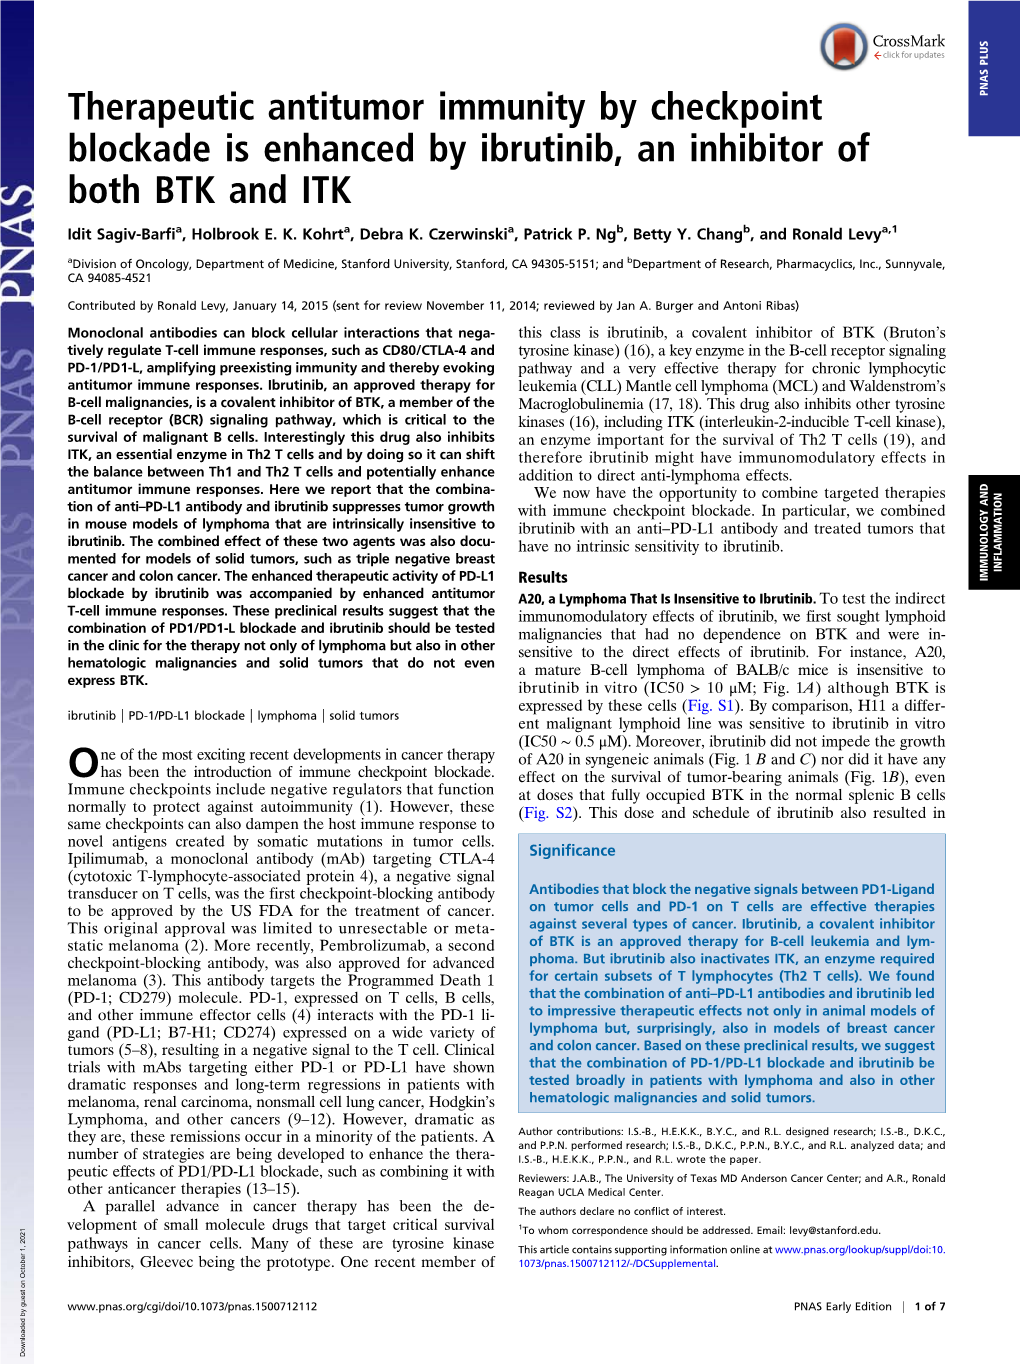 Therapeutic Antitumor Immunity by Checkpoint Blockade Is Enhanced by Ibrutinib, an Inhibitor of Both BTK And